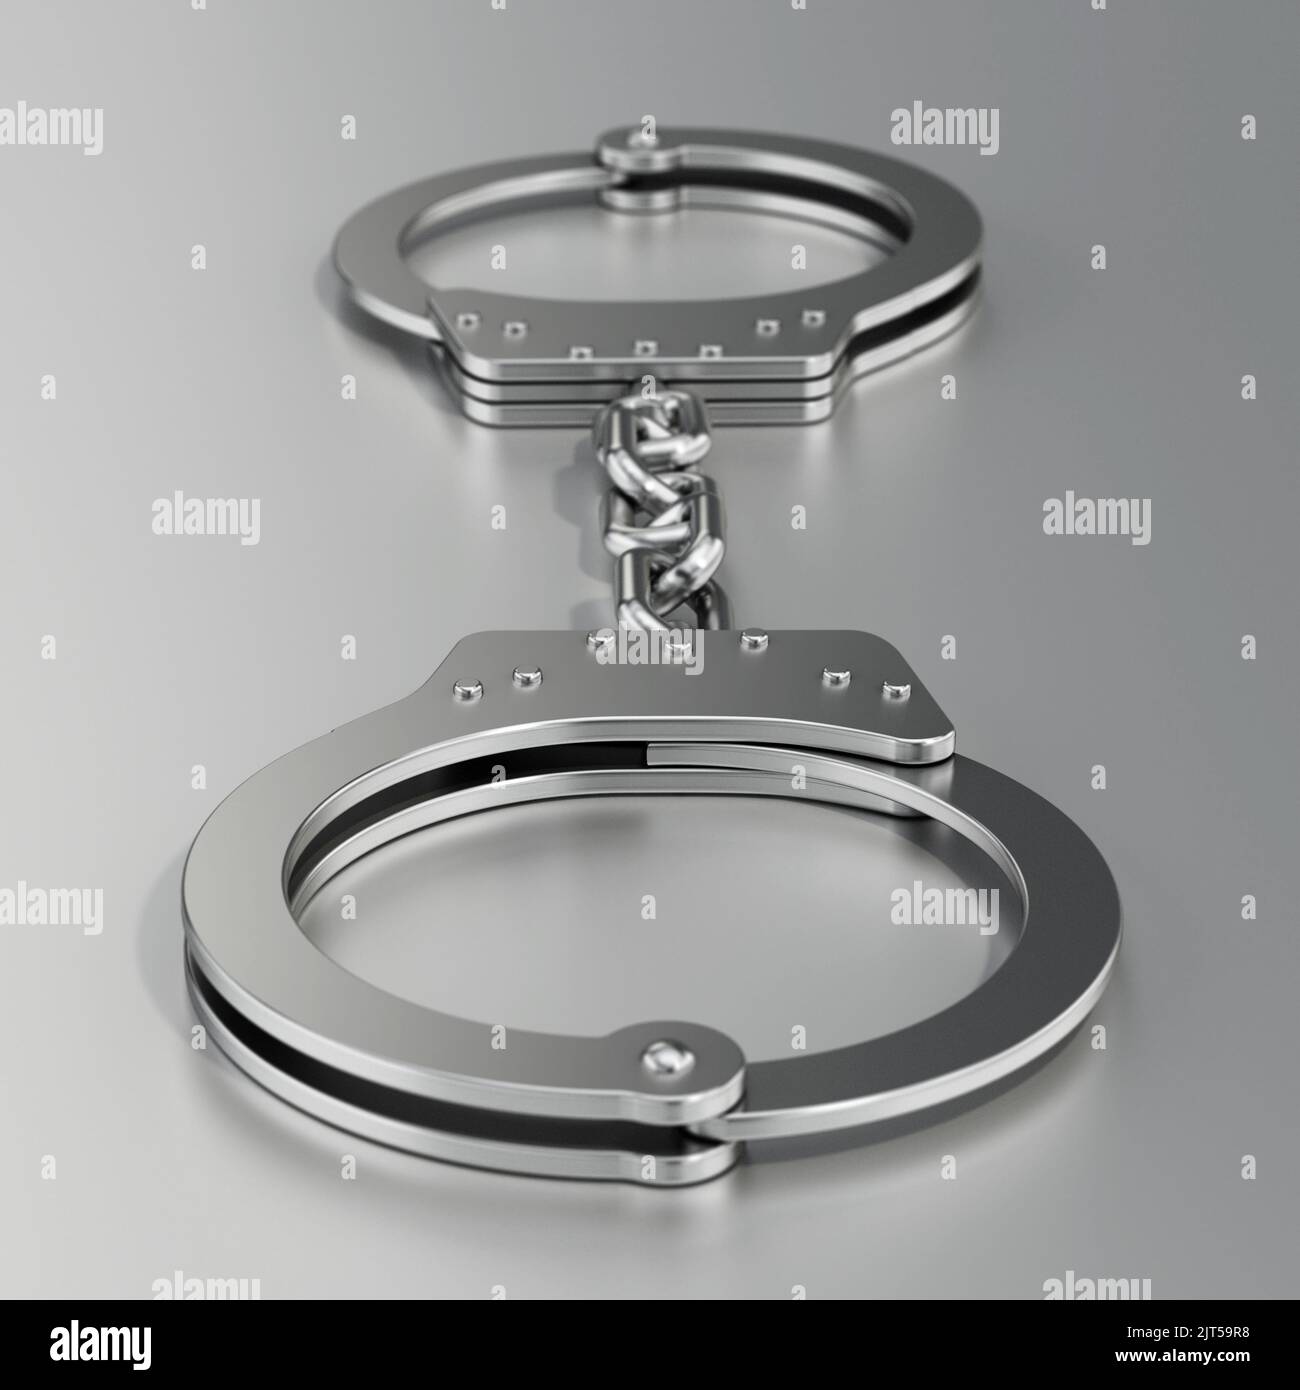 Handcuffs standing on gray background. 3D illustration. Stock Photo